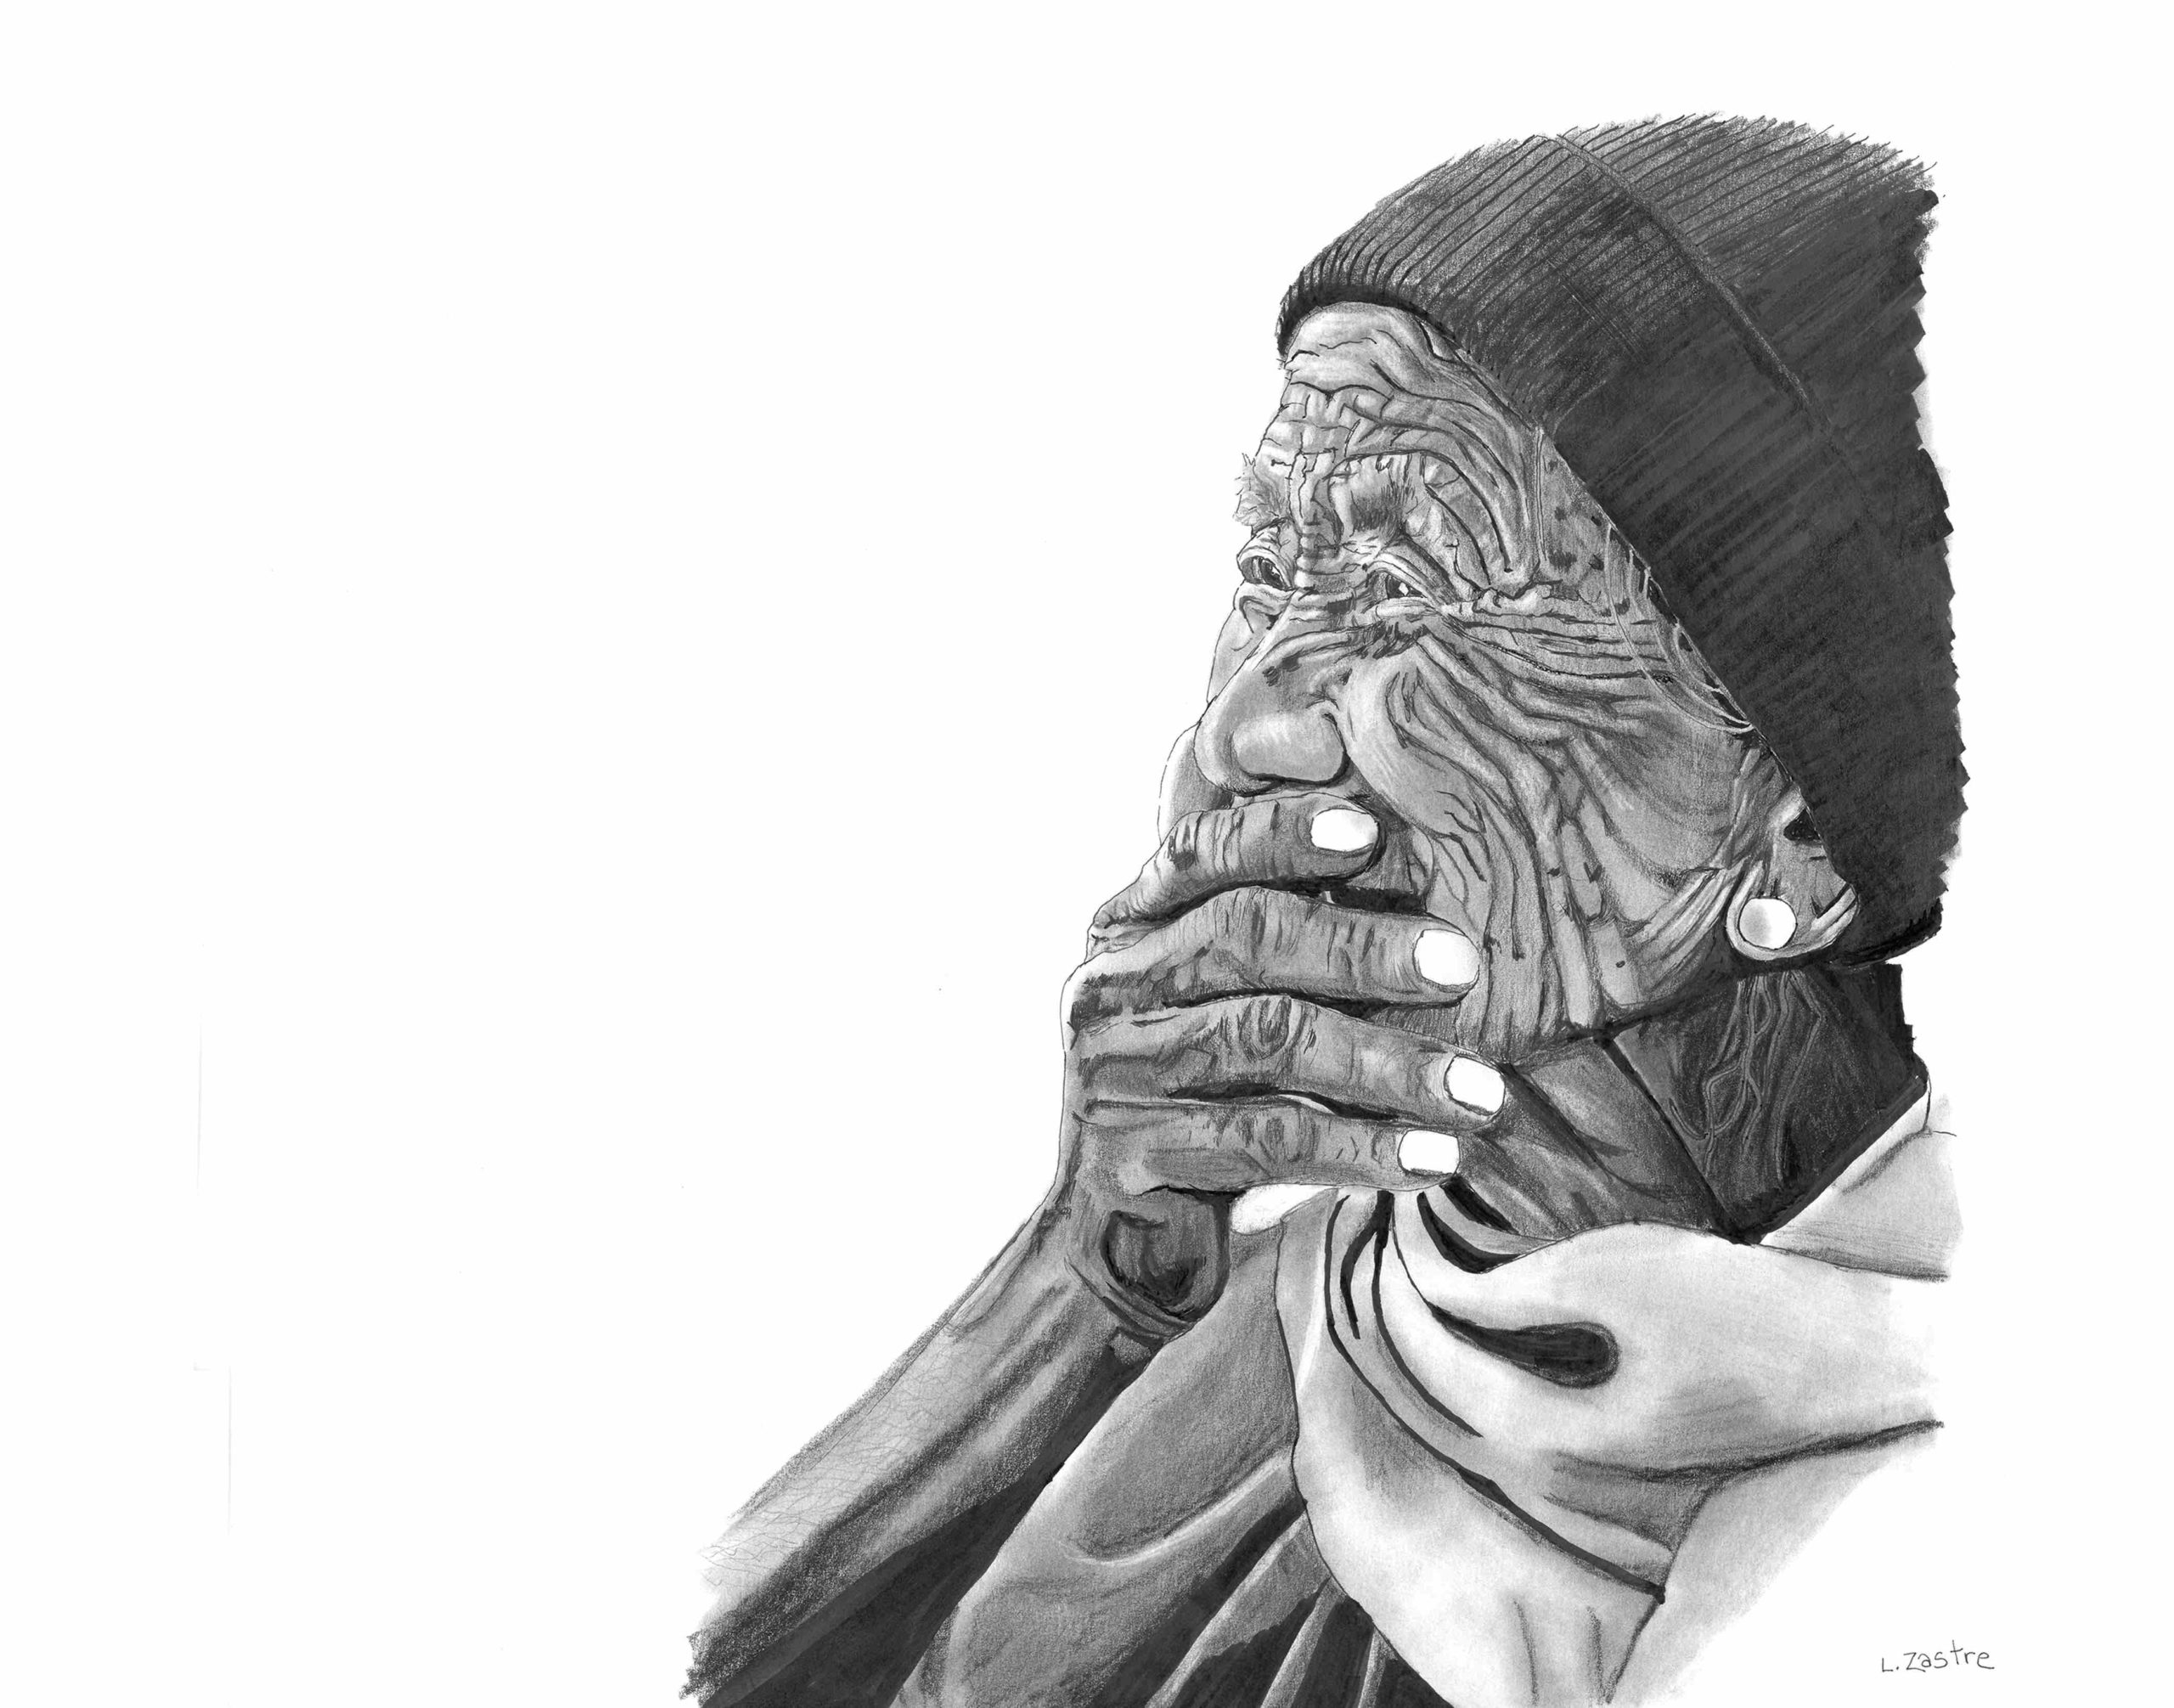 This is a drawing of an elderly woman, viewed from the side. She wears a dark headscarf and covers her mouth with one hand, laughing mirthfully.